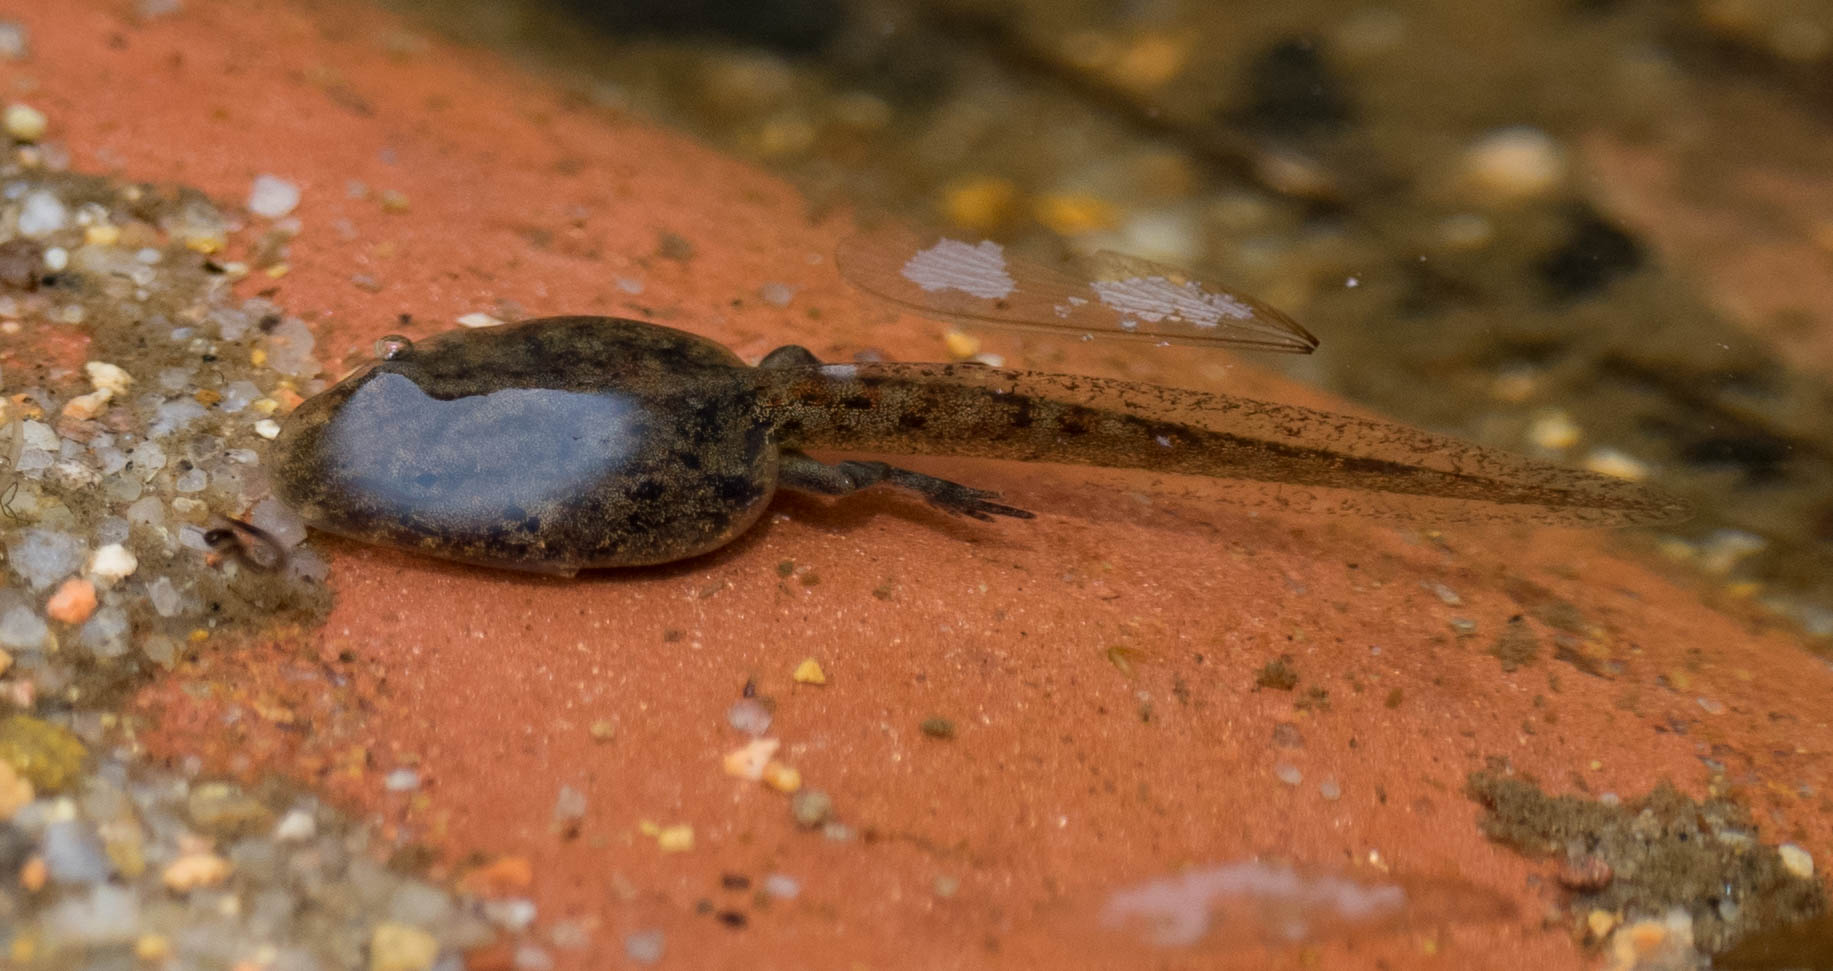 This Clicking Froglet tadpole has grown hindlegs.